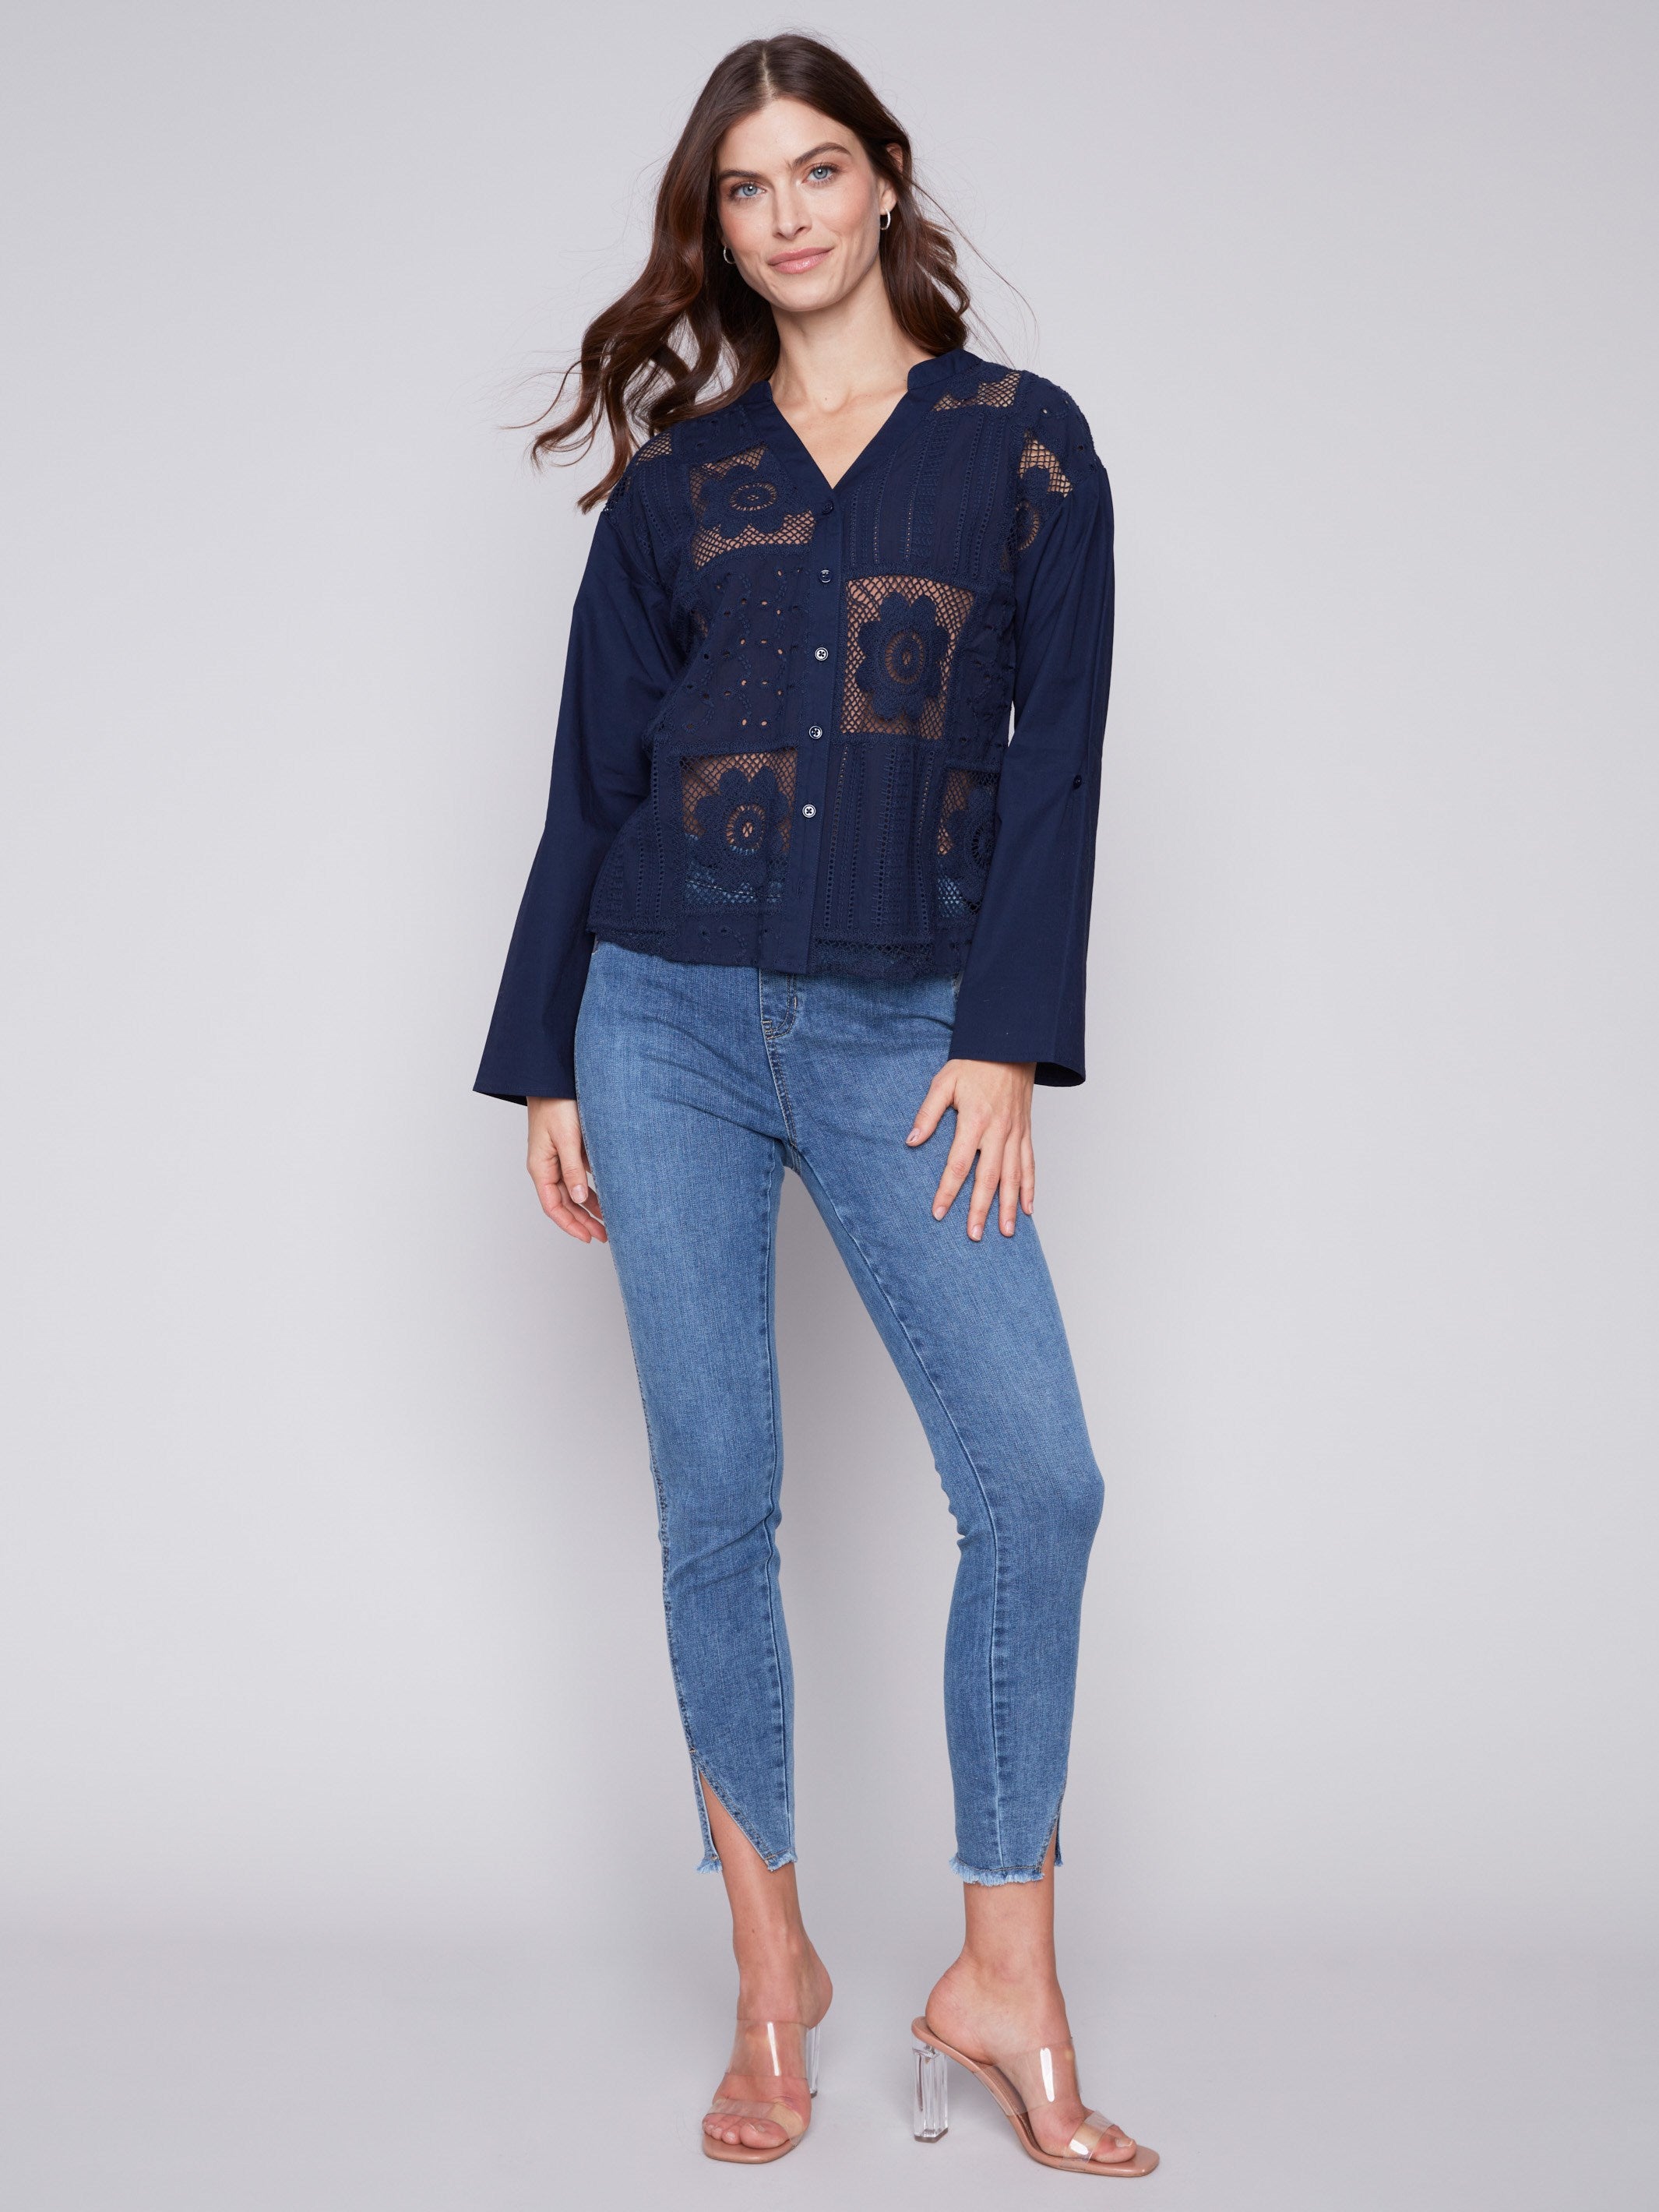 Cotton Eyelet Shirt - Navy - Charlie B Collection Canada - Image 3